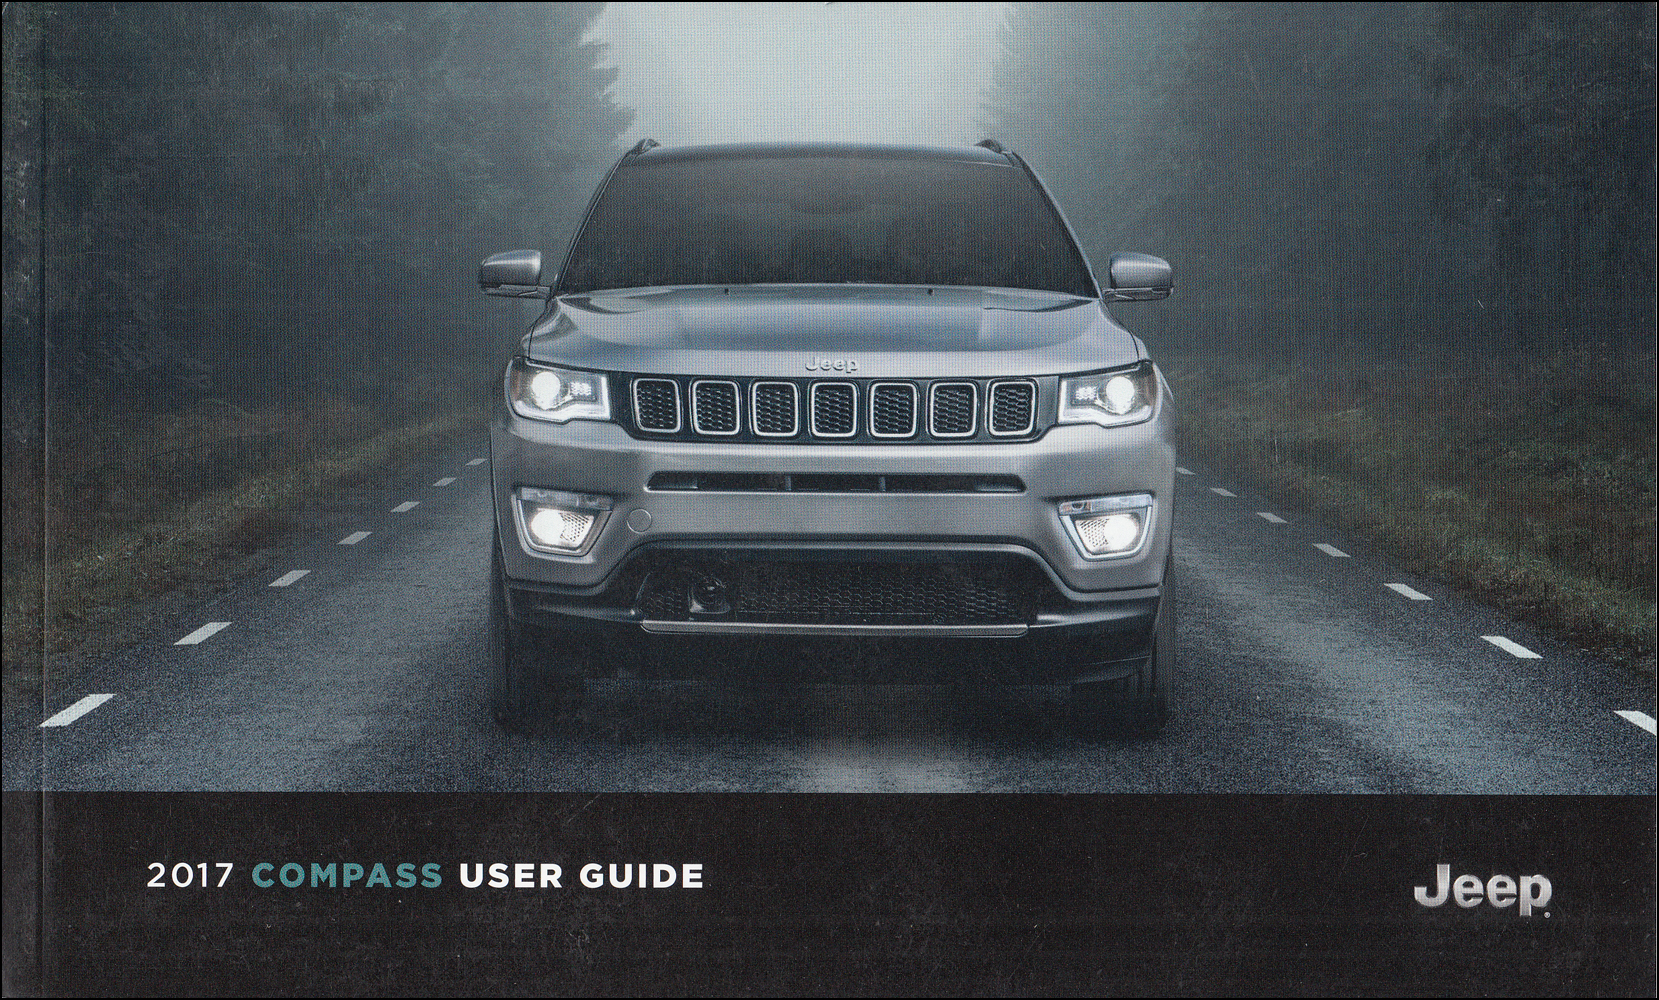 2017 Jeep Compass Next Generation User Guide Owner's Manual Original